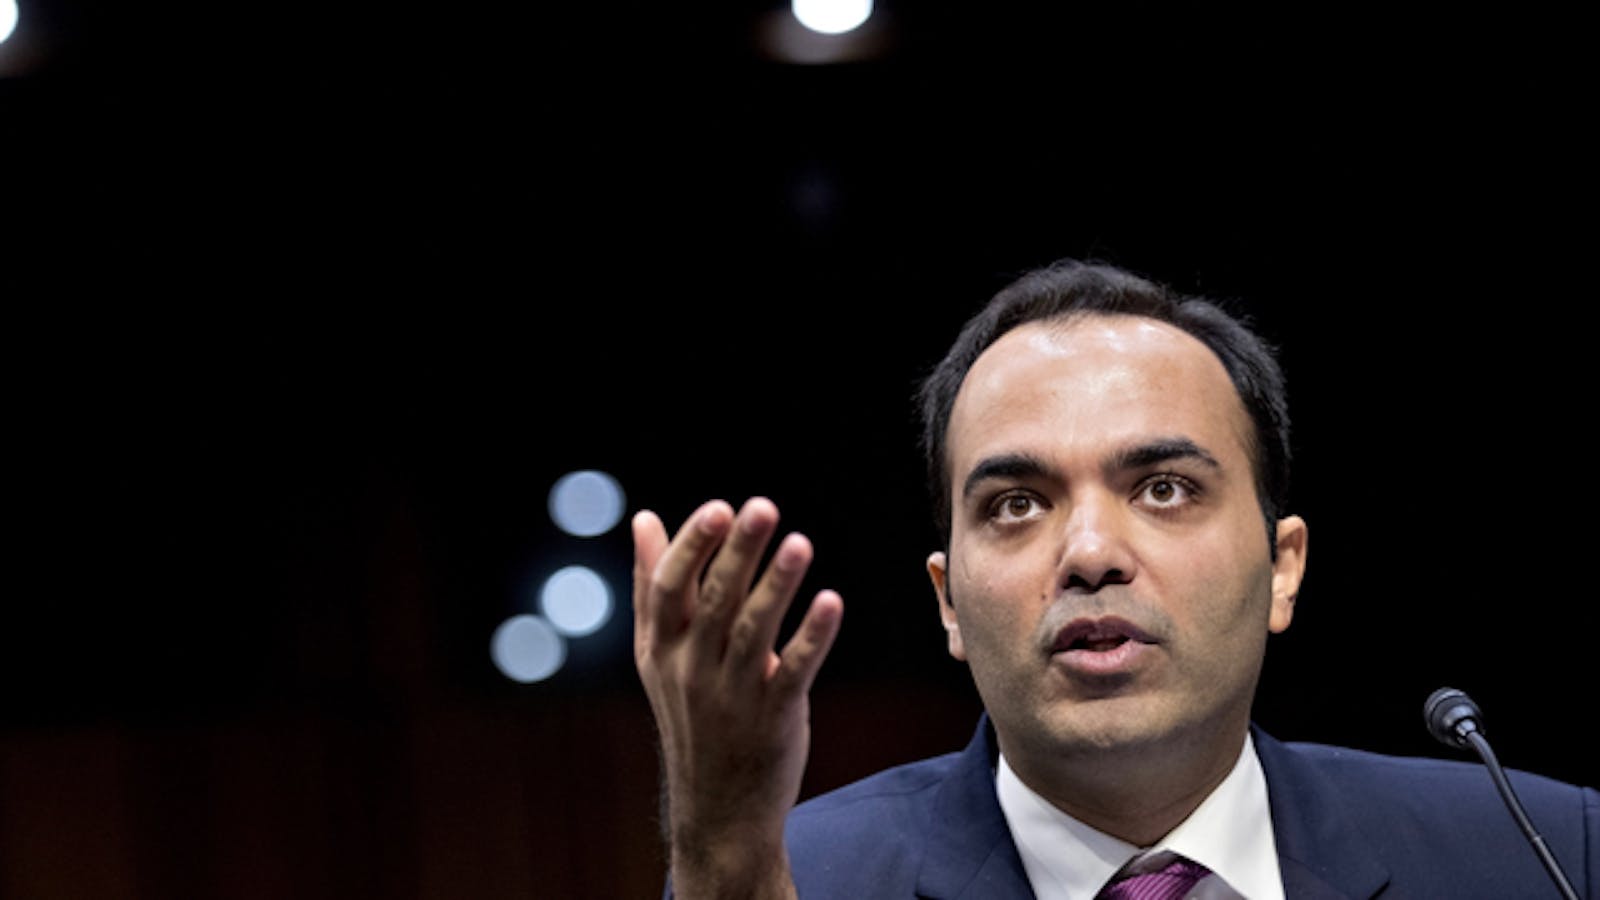 Rohit Chopra at his Senate confirmation hearing for the FTC role, in February 2018. Photo: Bloomberg